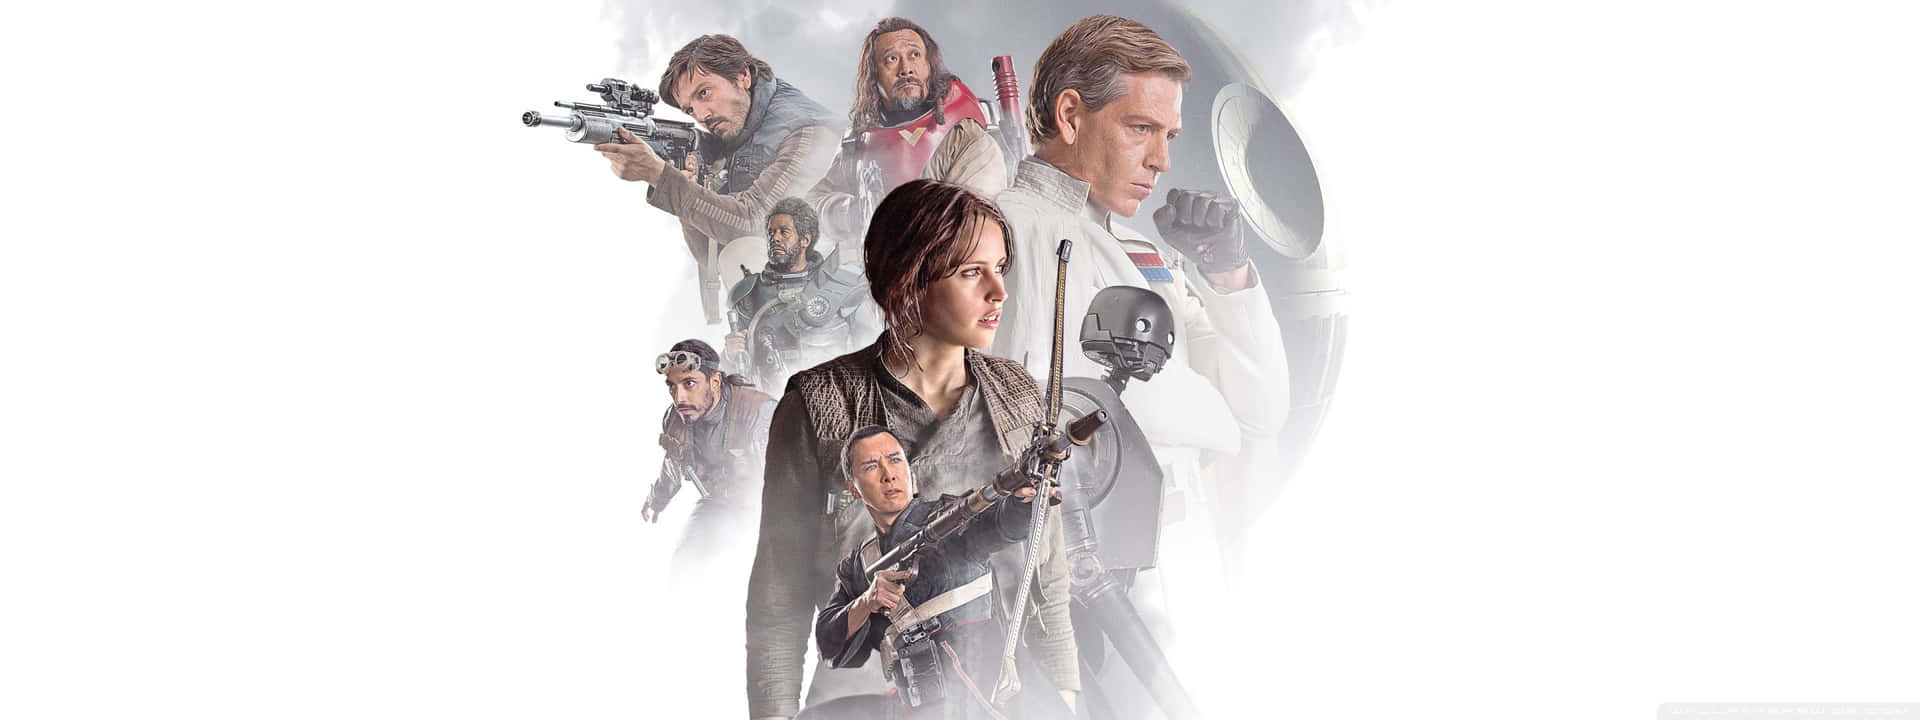 Celebrating the heroes of Rogue One Wallpaper